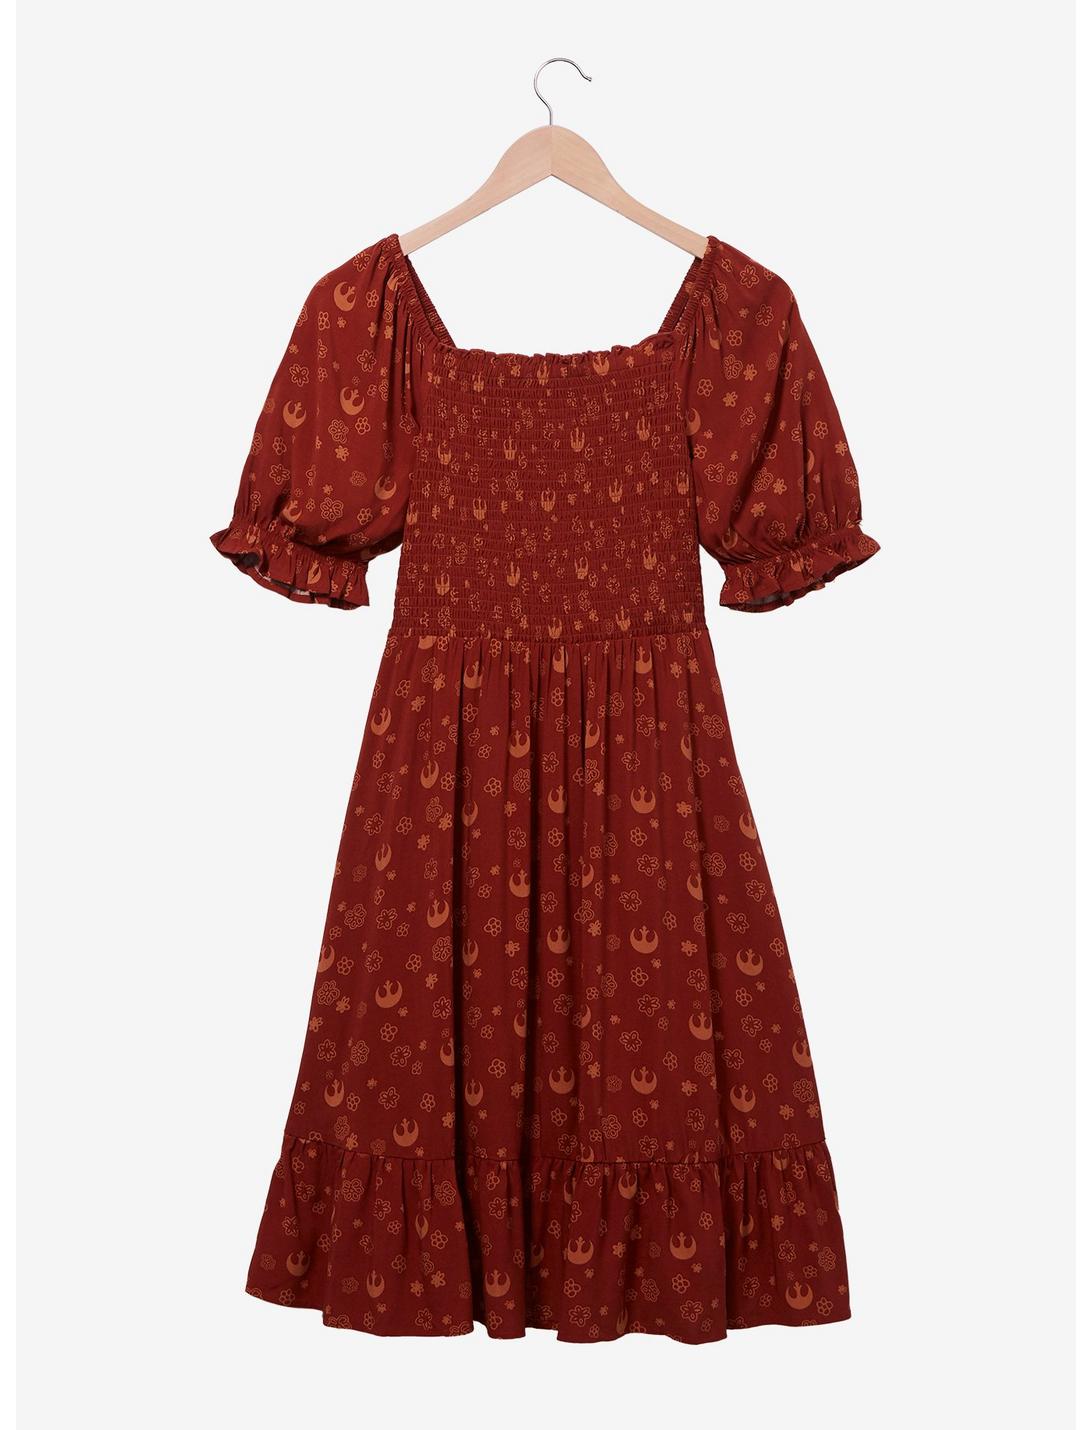 Her Universe Star Wars Rebellion Floral Allover Print Smock Dress - BoxLunch Exclusive, RUST, hi-res